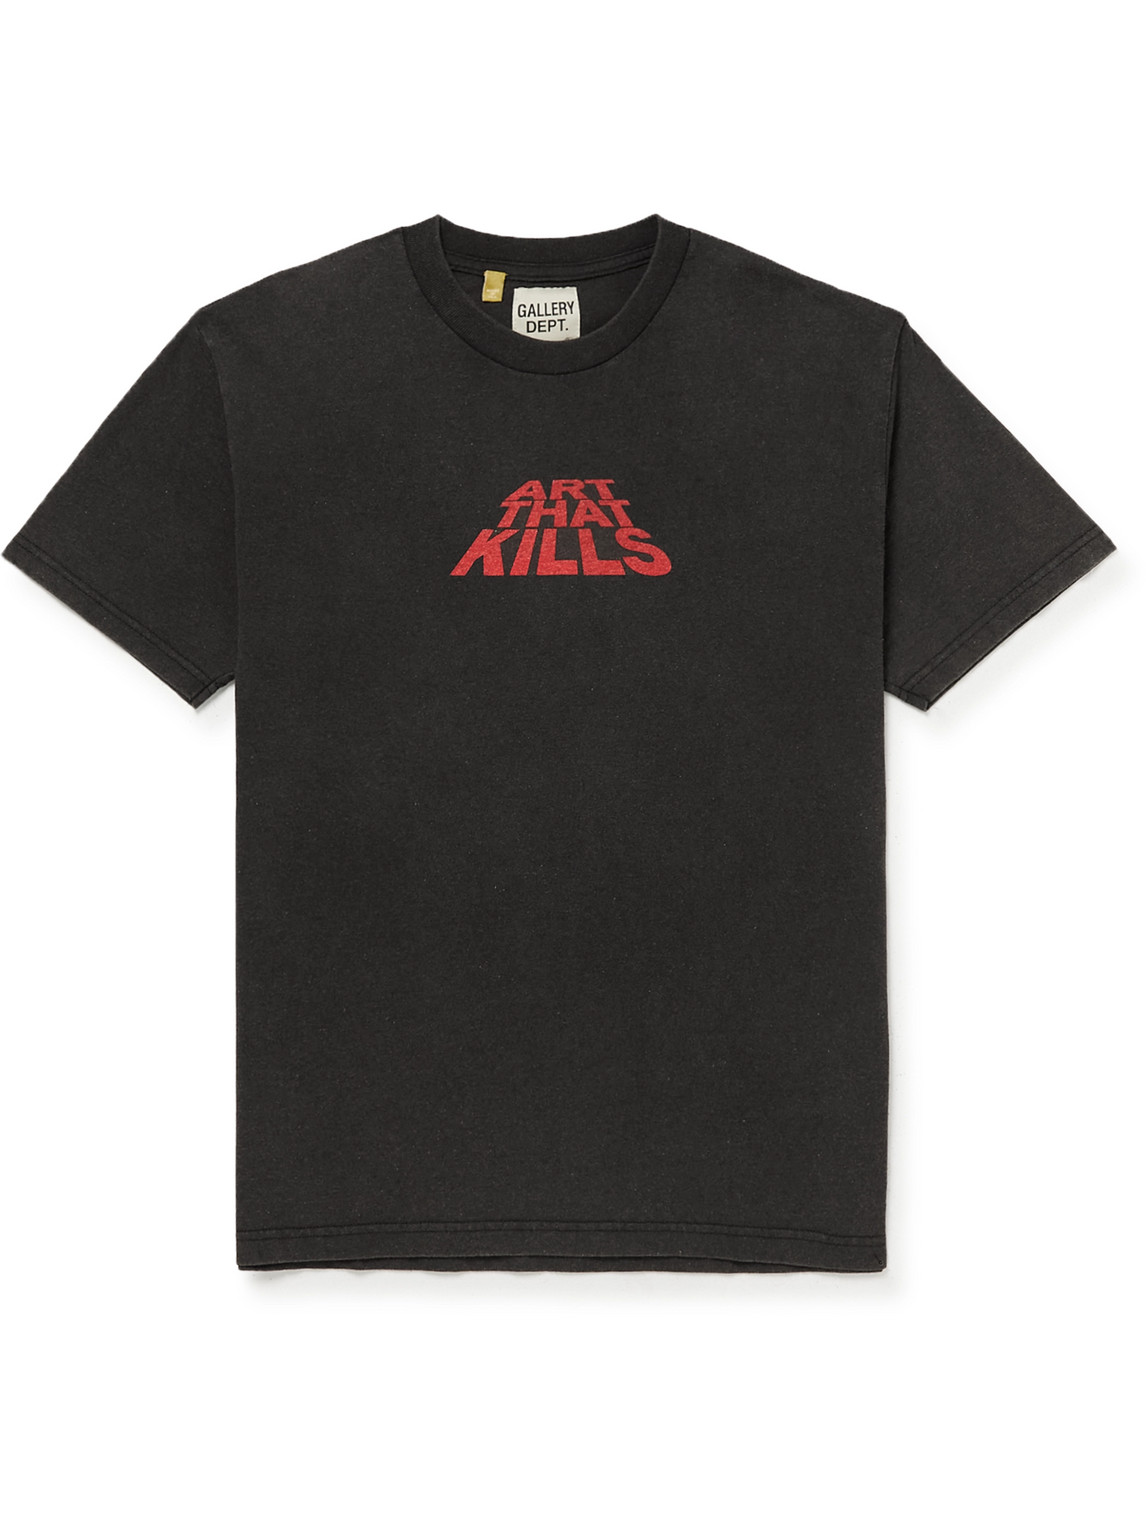 Gallery Dept. Atk Printed Cotton-jersey T-shirt In Black